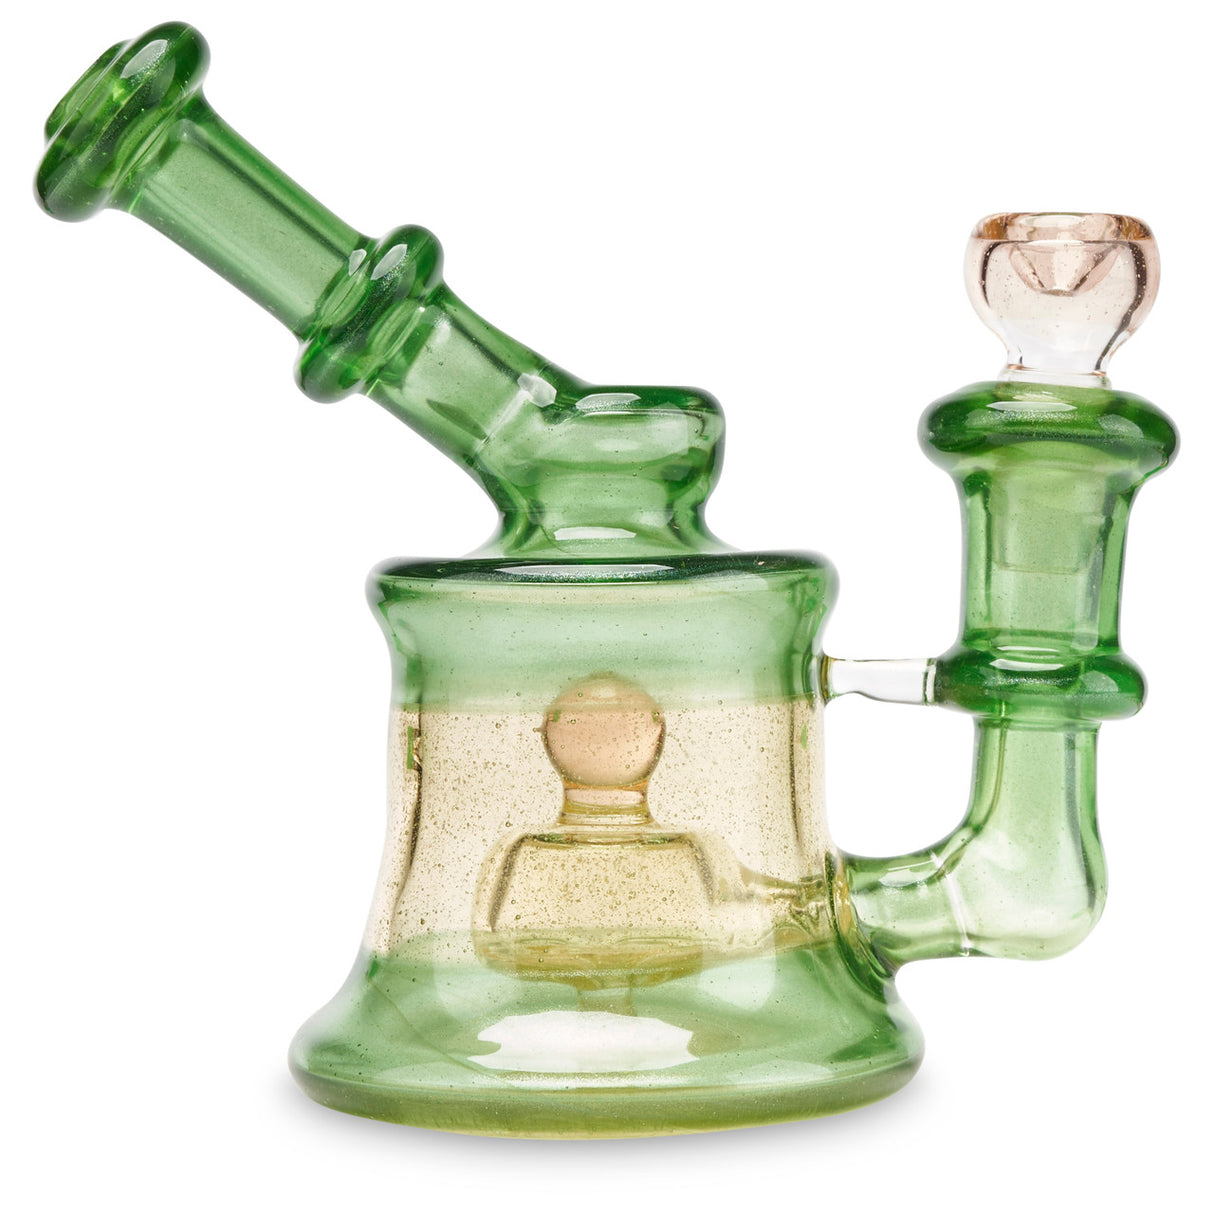 clc glass banger hanger green and yellow rig for smoking herbs and oils